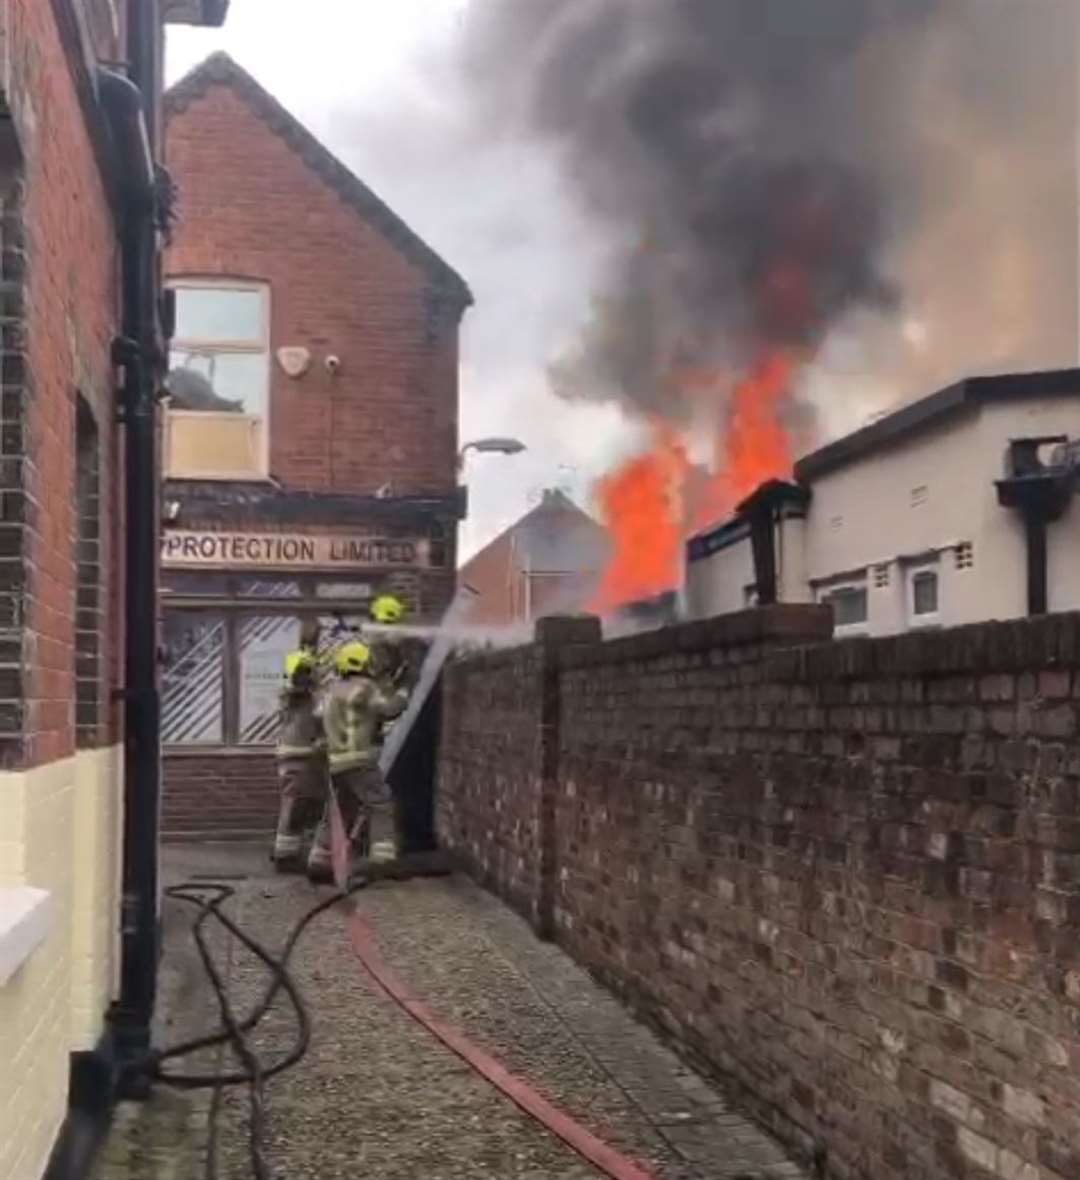 Firefighters battling the blaze. Picture: Geoff Montague-Smith.